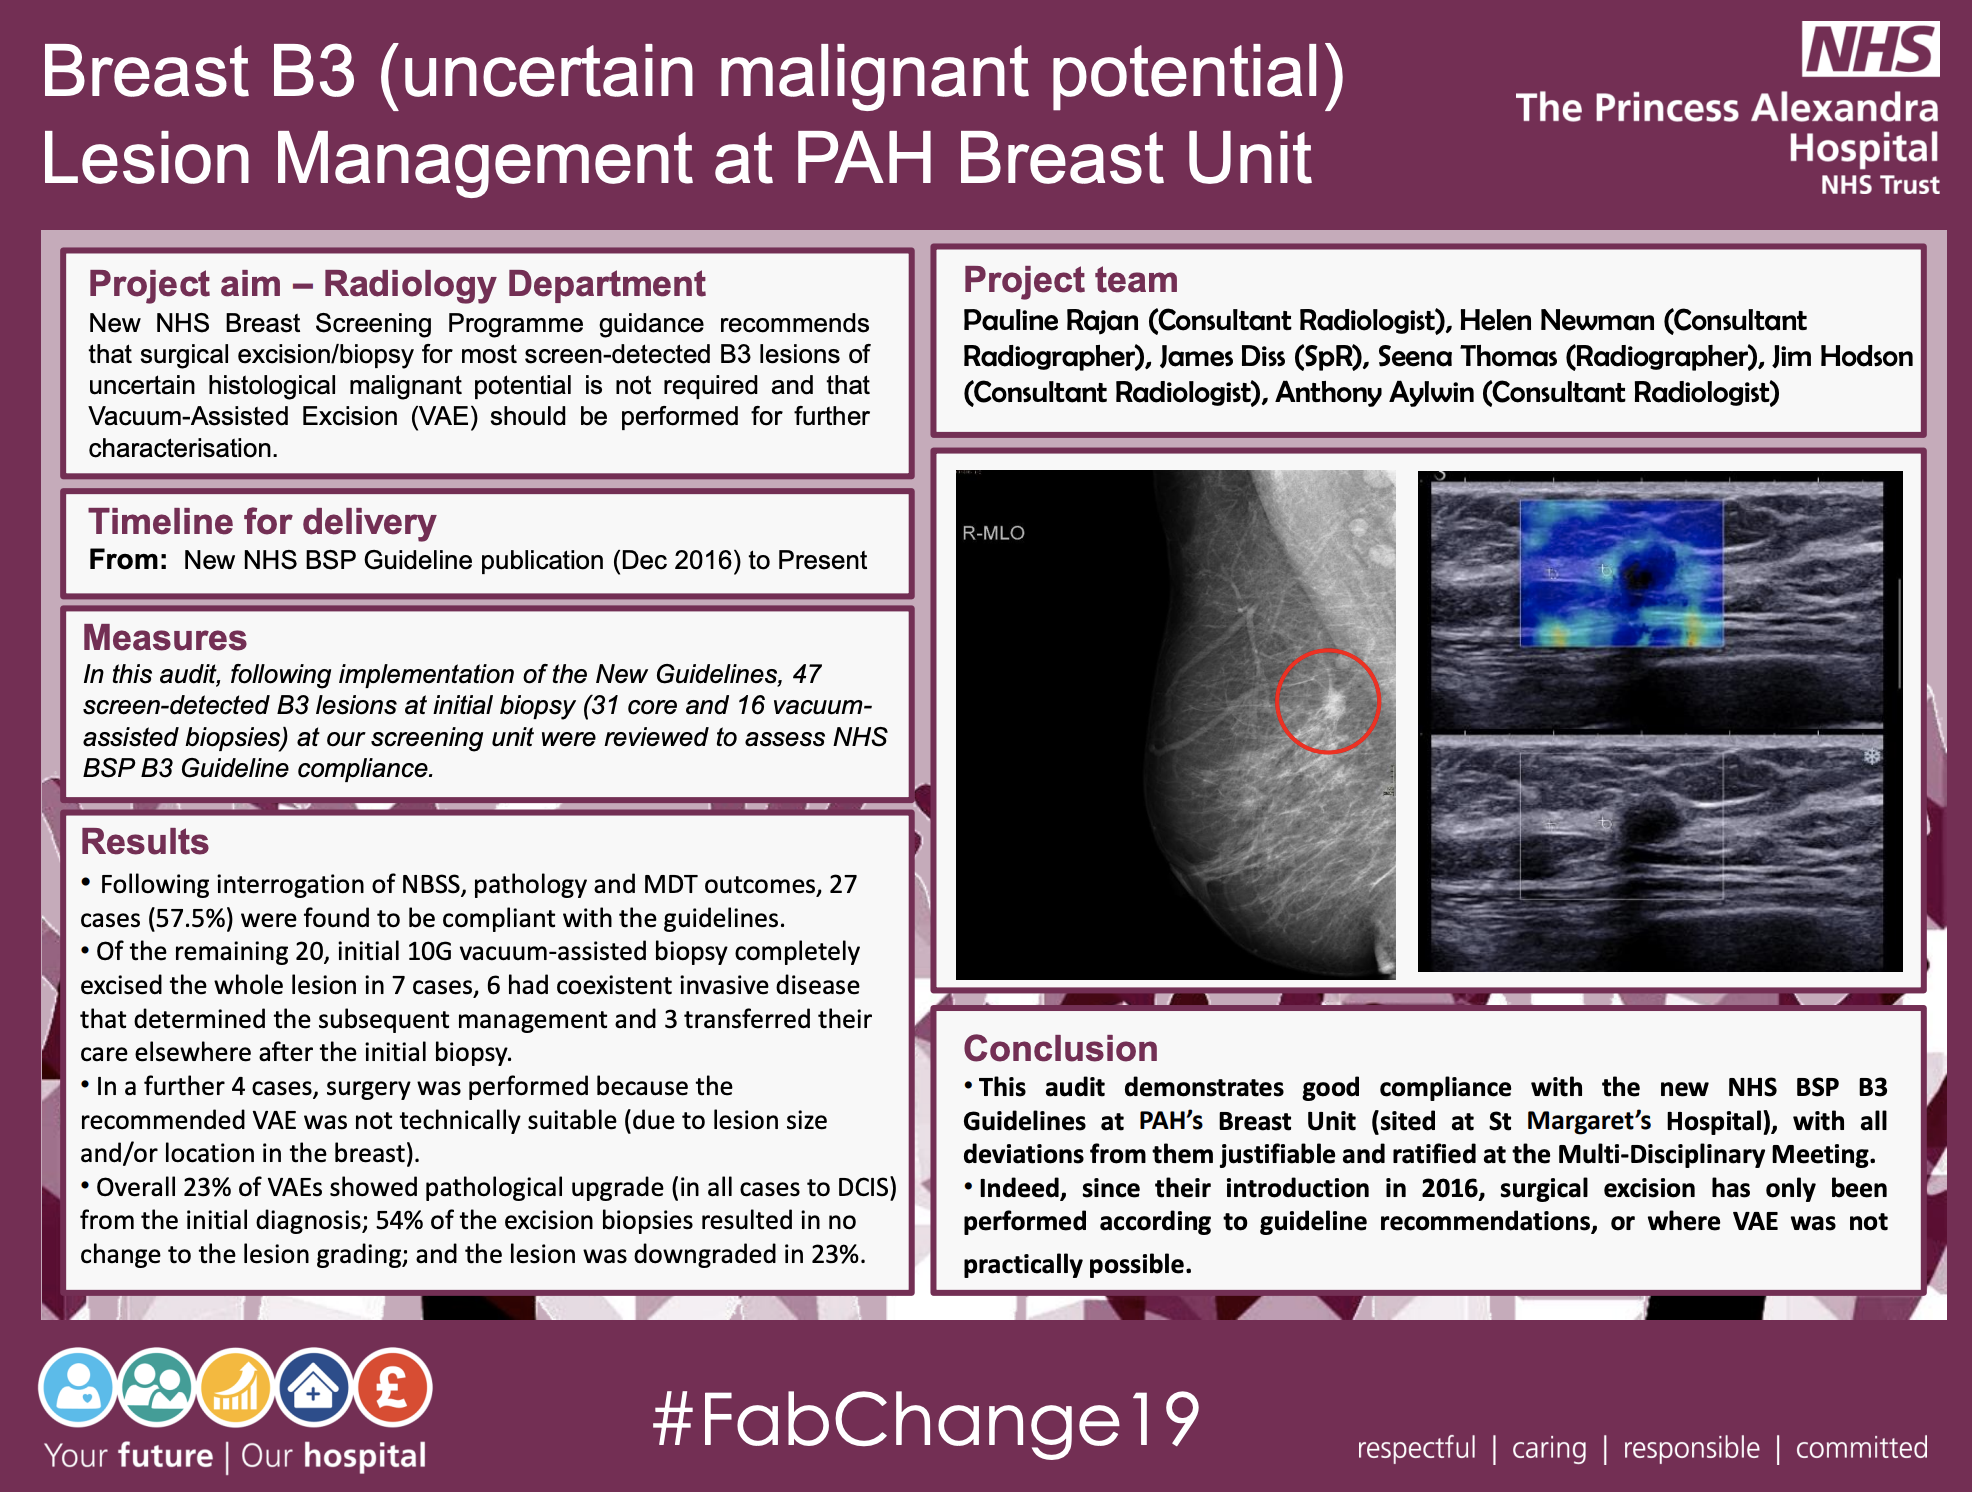 Breast B3 (uncertain Malignant potential) Lesion Management at PAH Breast Unit - @QualityFirstPAH featured image